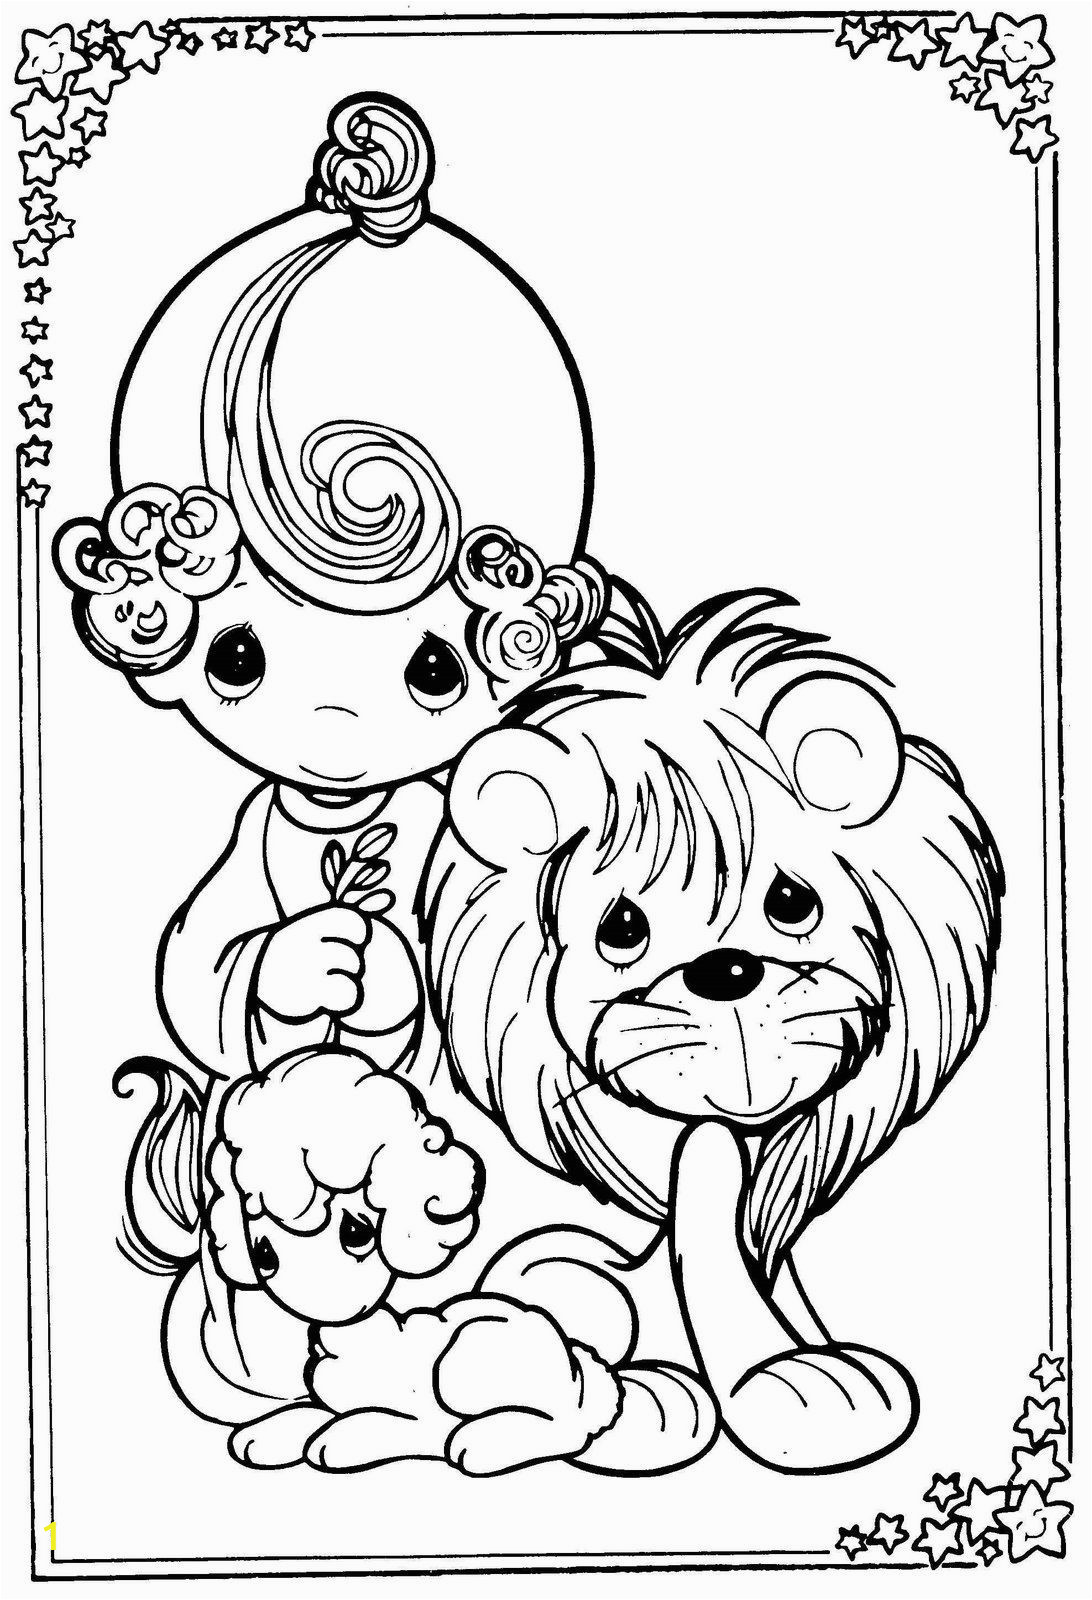 Stuffed Animal Coloring Pages Tattoo Idea the Lion and Lamb Represent My Children their